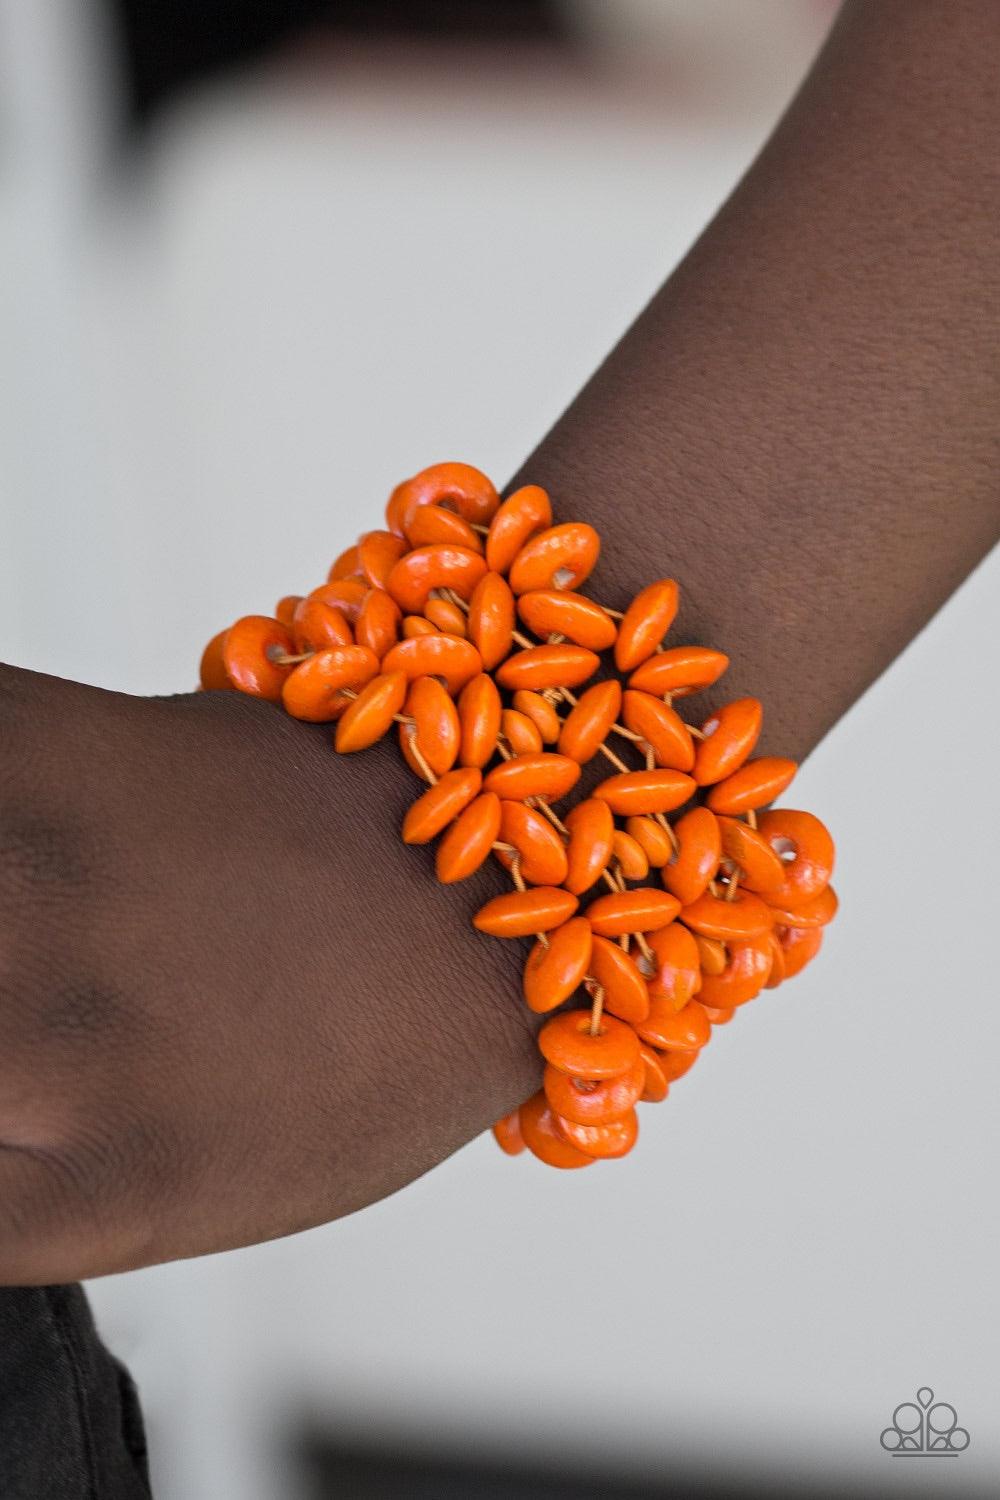 Paparazzi Accessories Hawaii Haven - Orange Vivacious orange wooden accents are threaded along elastic stretchy bands, creating summery floral patterns across the wrist for a seasonal look. Jewelry